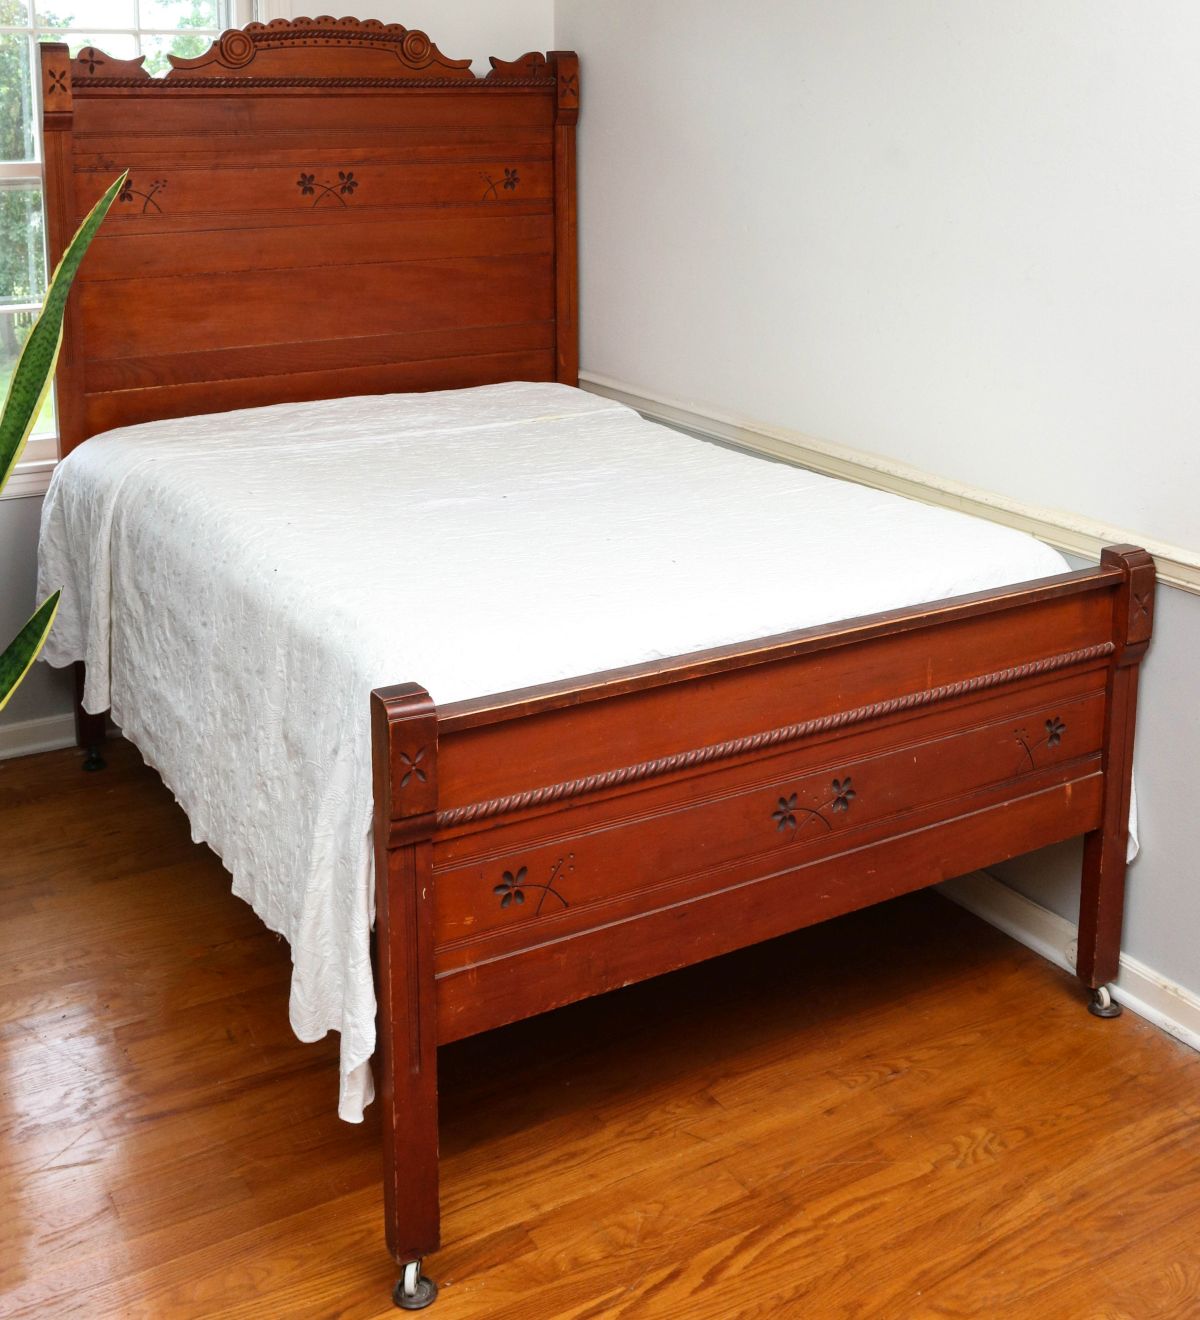 A 3/4 SIZE EASTLAKE STYLE BED HEAD AND FOOT BOARD